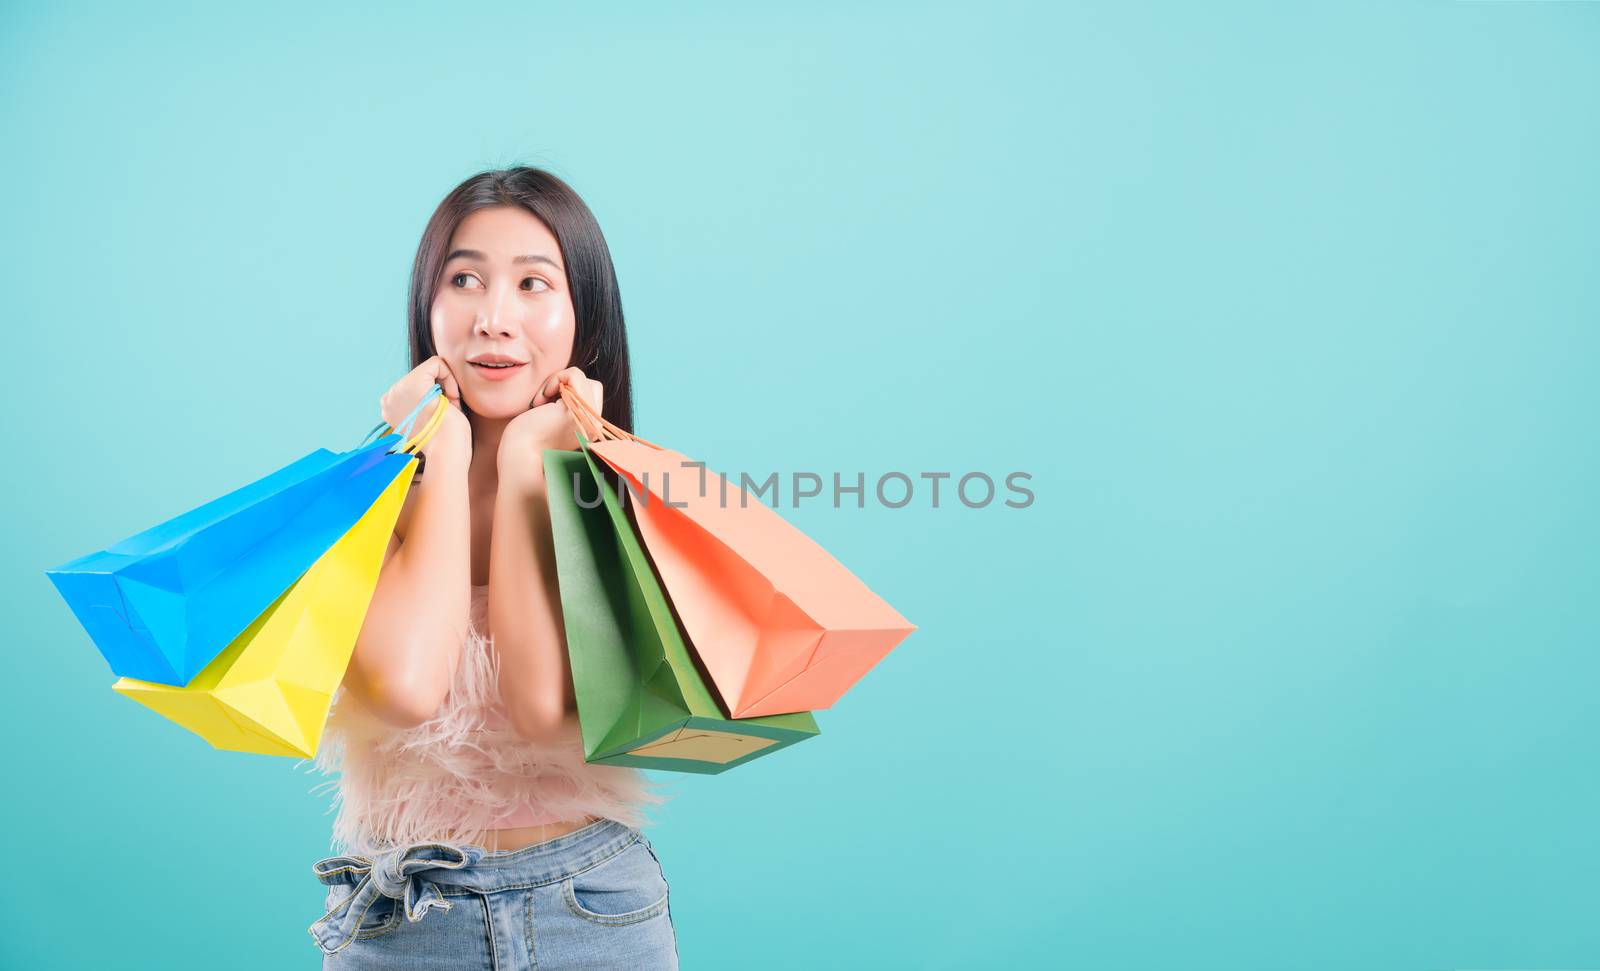 woman standing smile in summer shopping her holding multicolor s by Sorapop